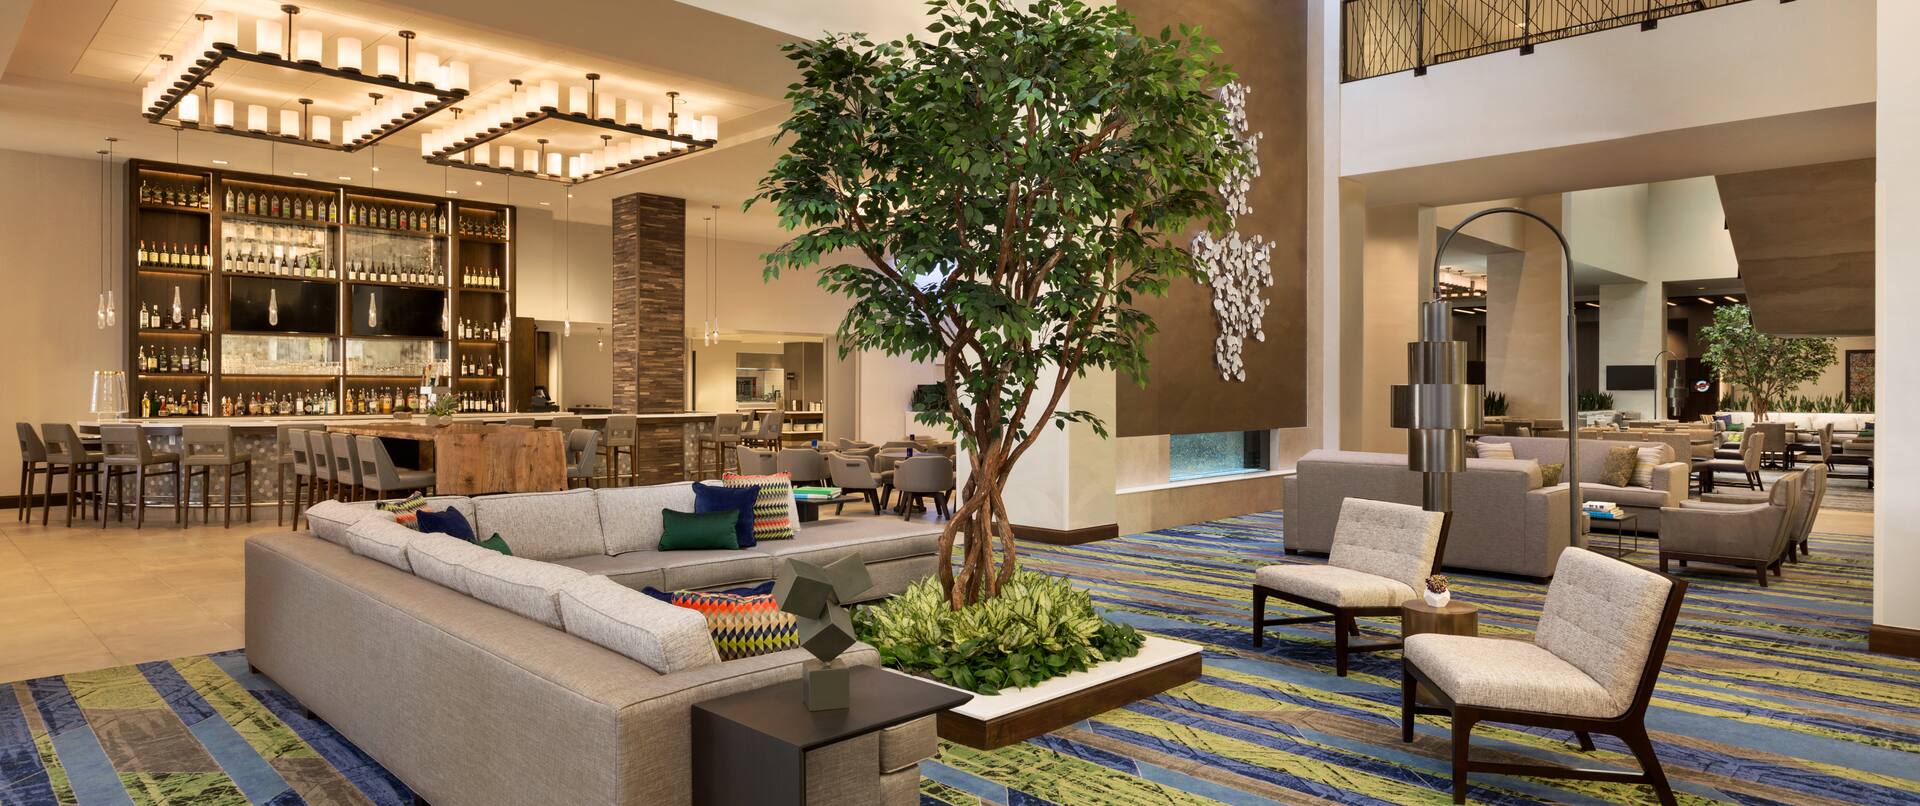 Atrium Seating Area with a Tree